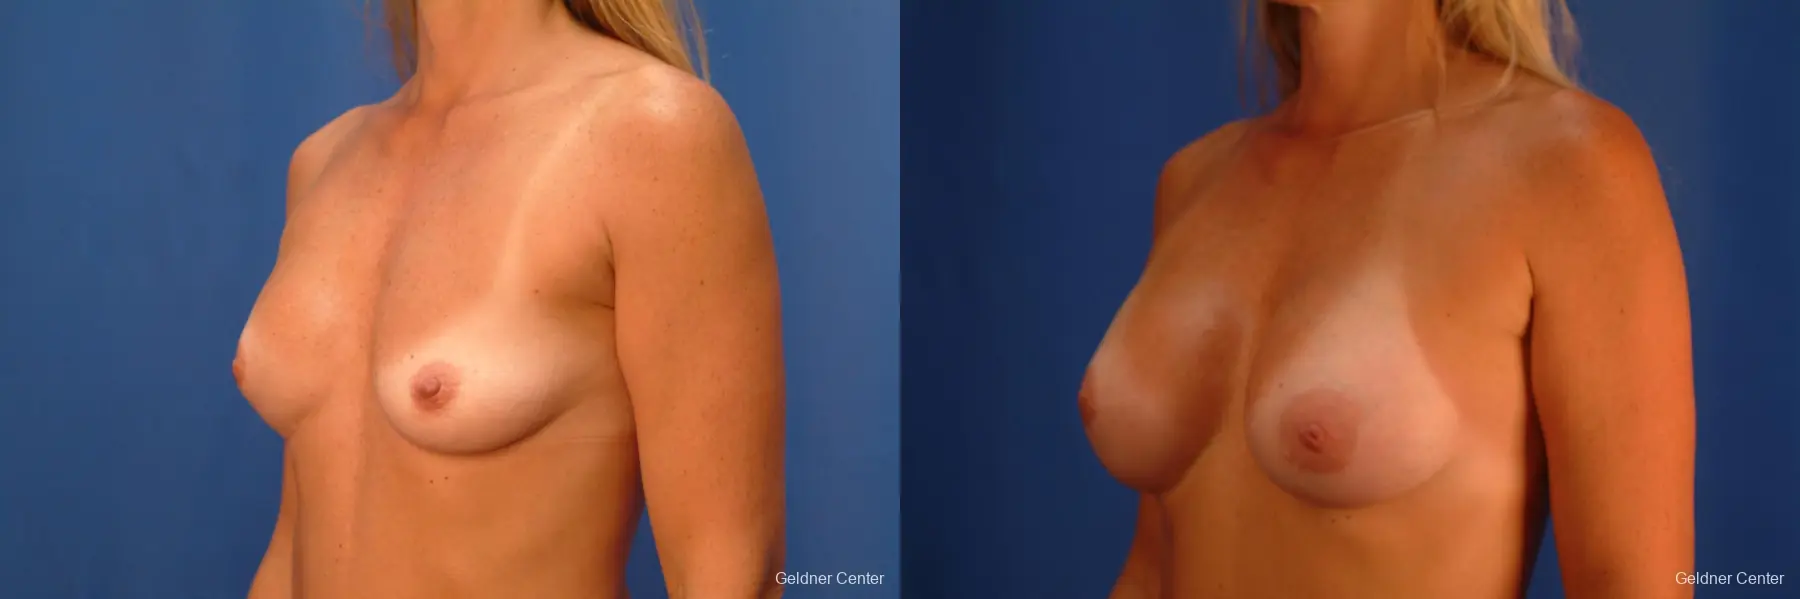 Breast Augmentation Lake Shore Dr, Chicago 2418 - Before and After 3